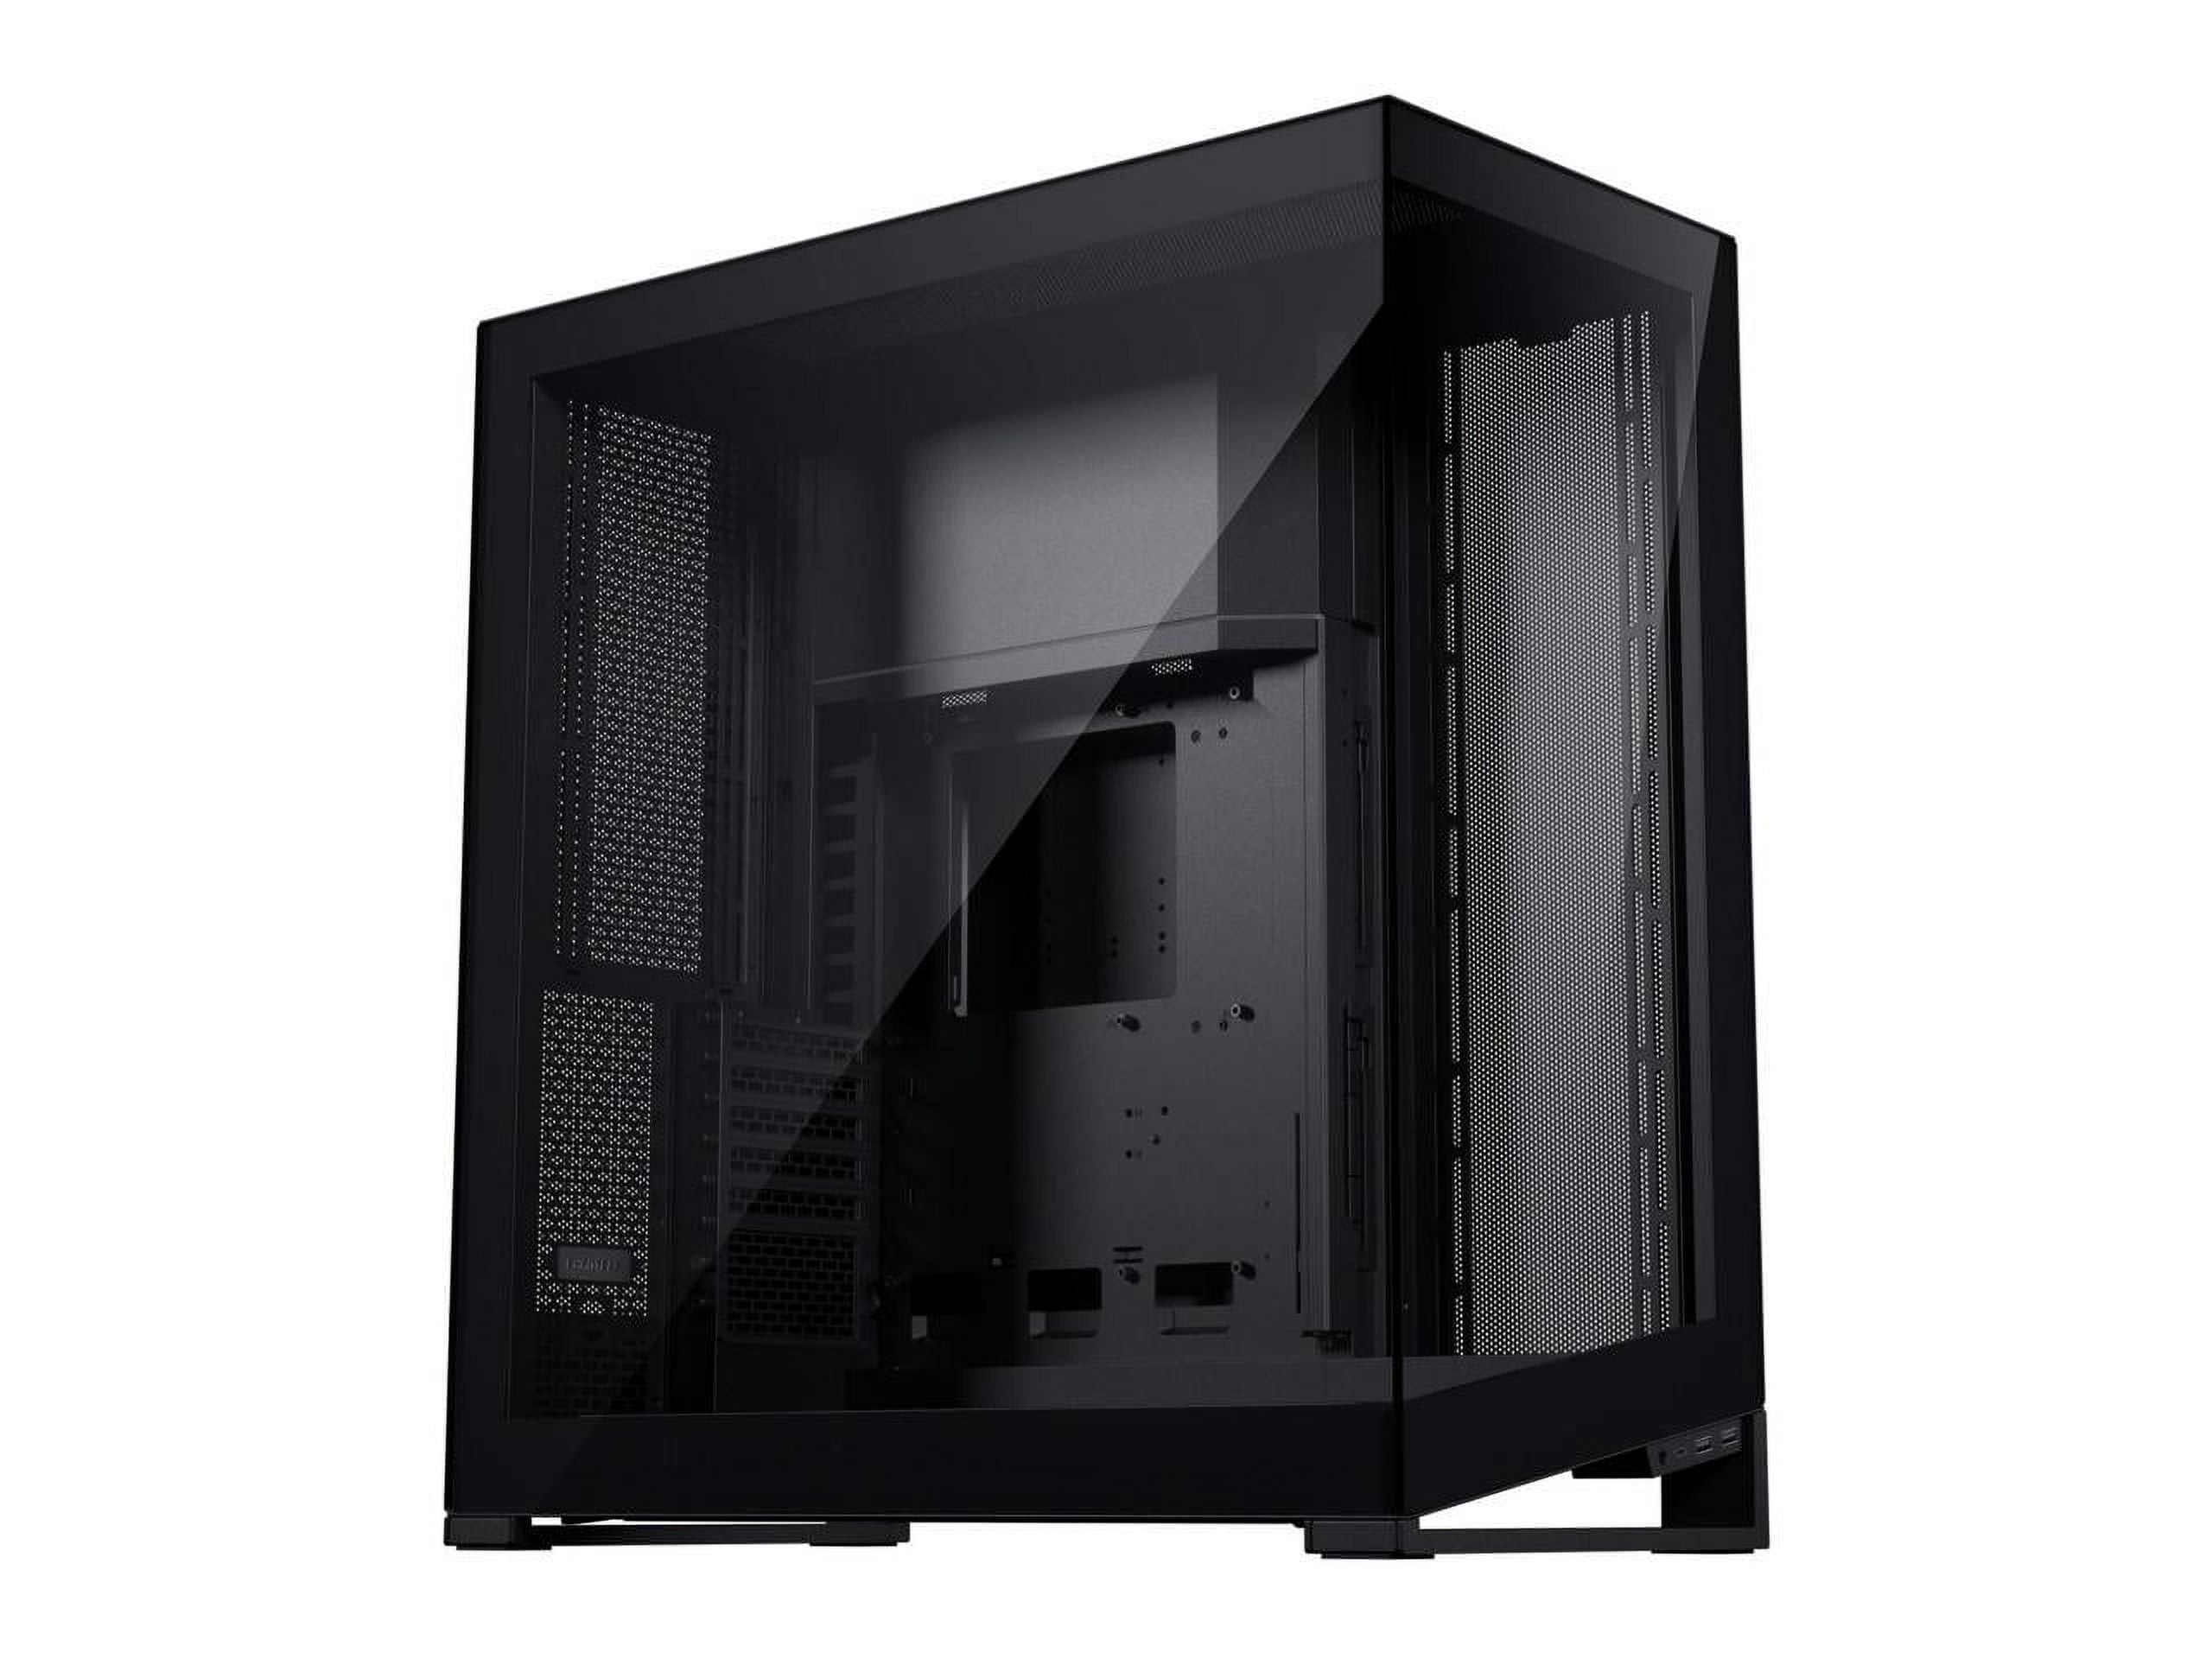 Phanteks' New Cases Brings Mesh and Fancy RGB Options (Update: Prices)